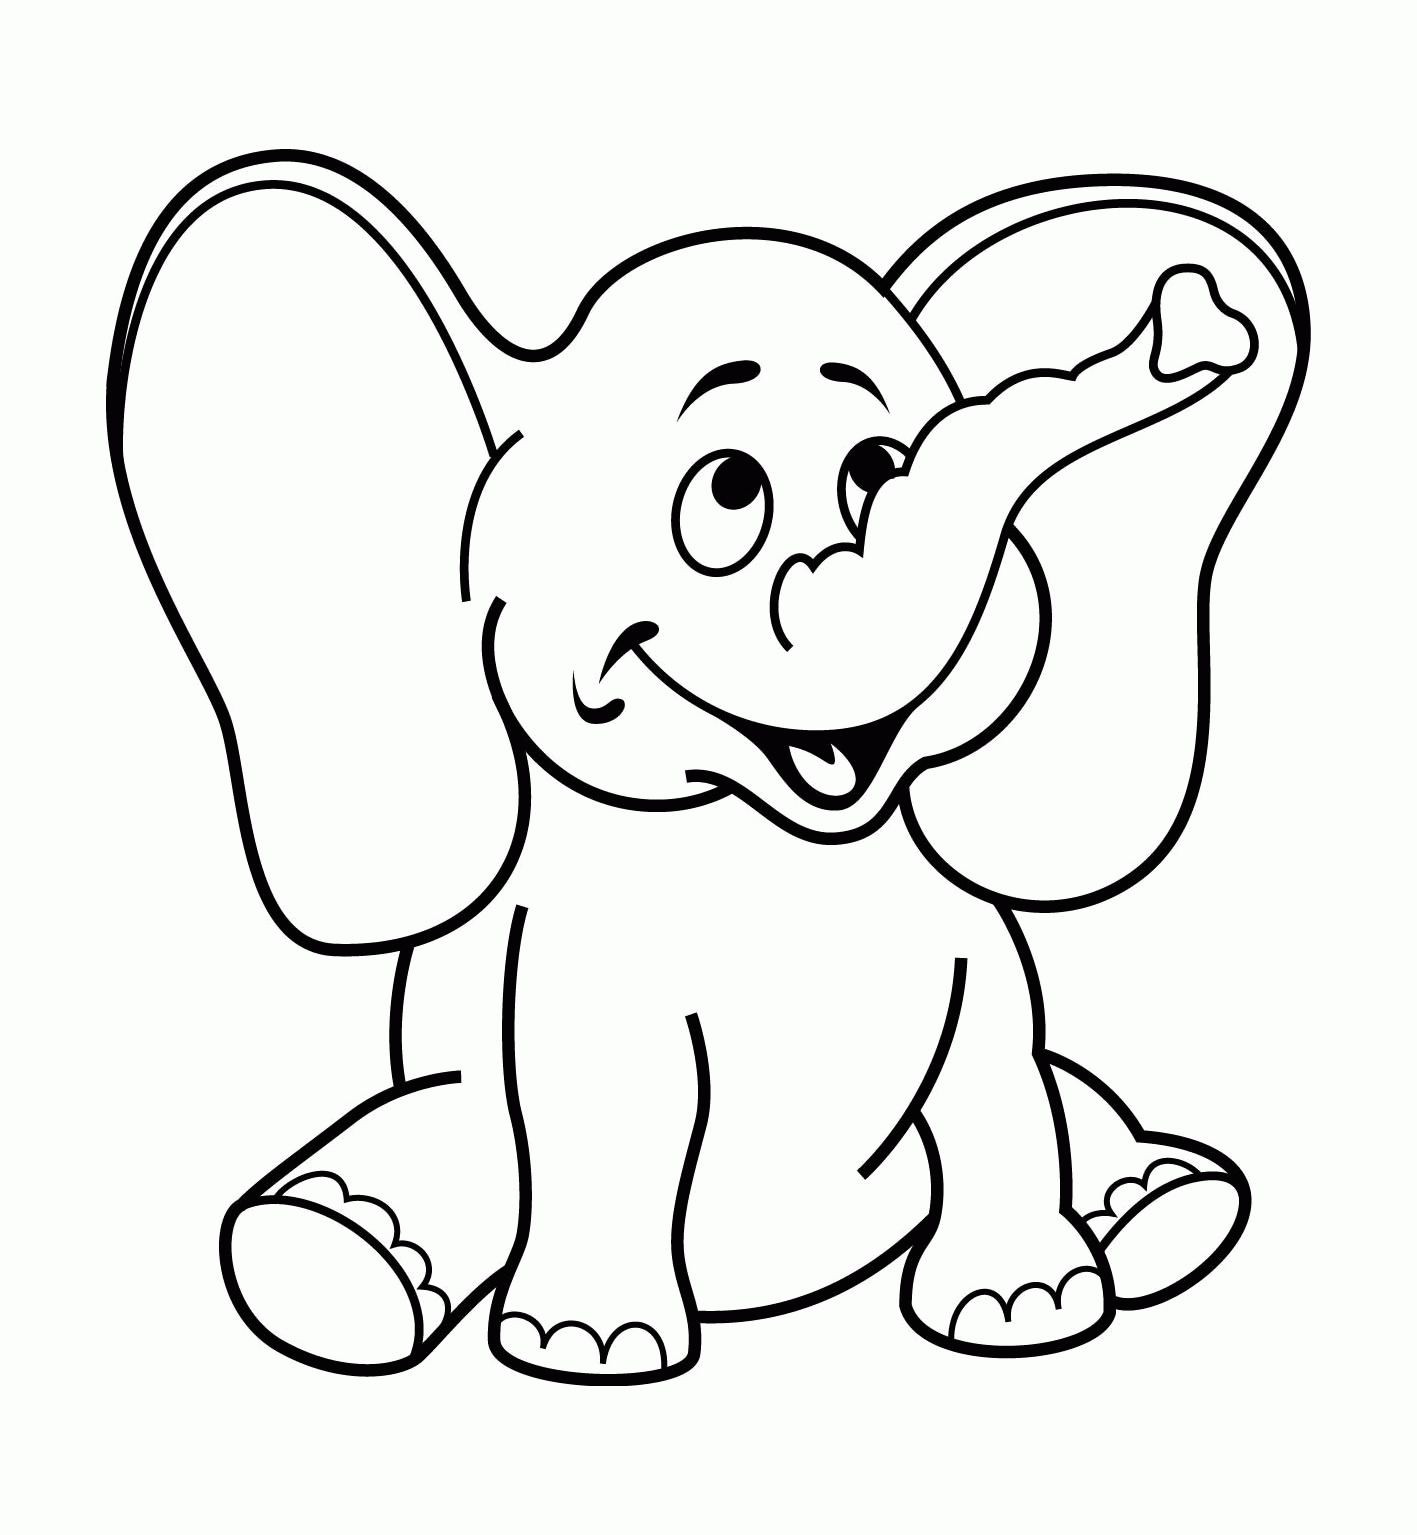 Coloring Page For 3 Years Old